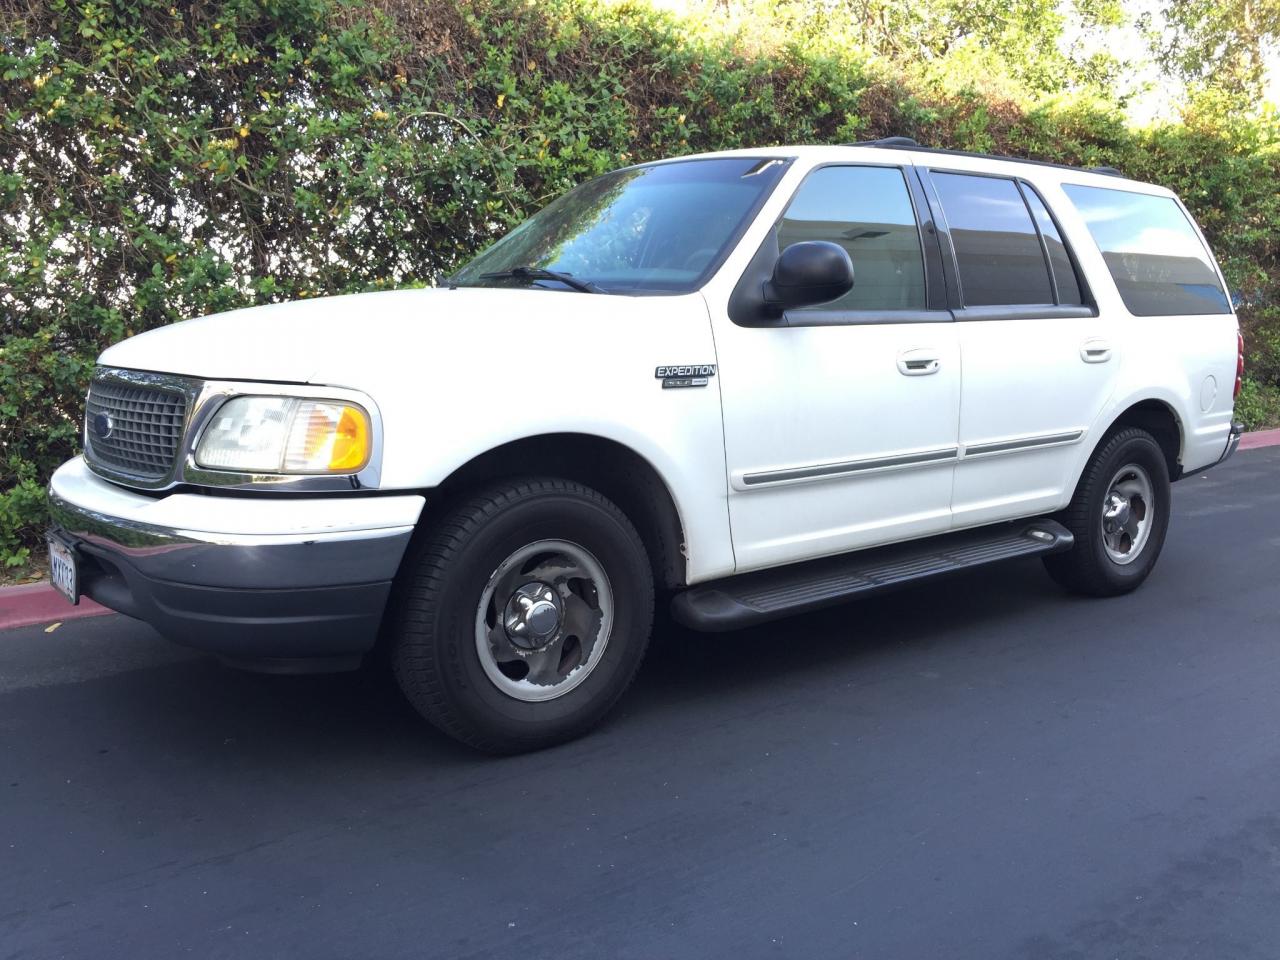 Used 2000 Ford Expedition XLT at City Cars Warehouse INC